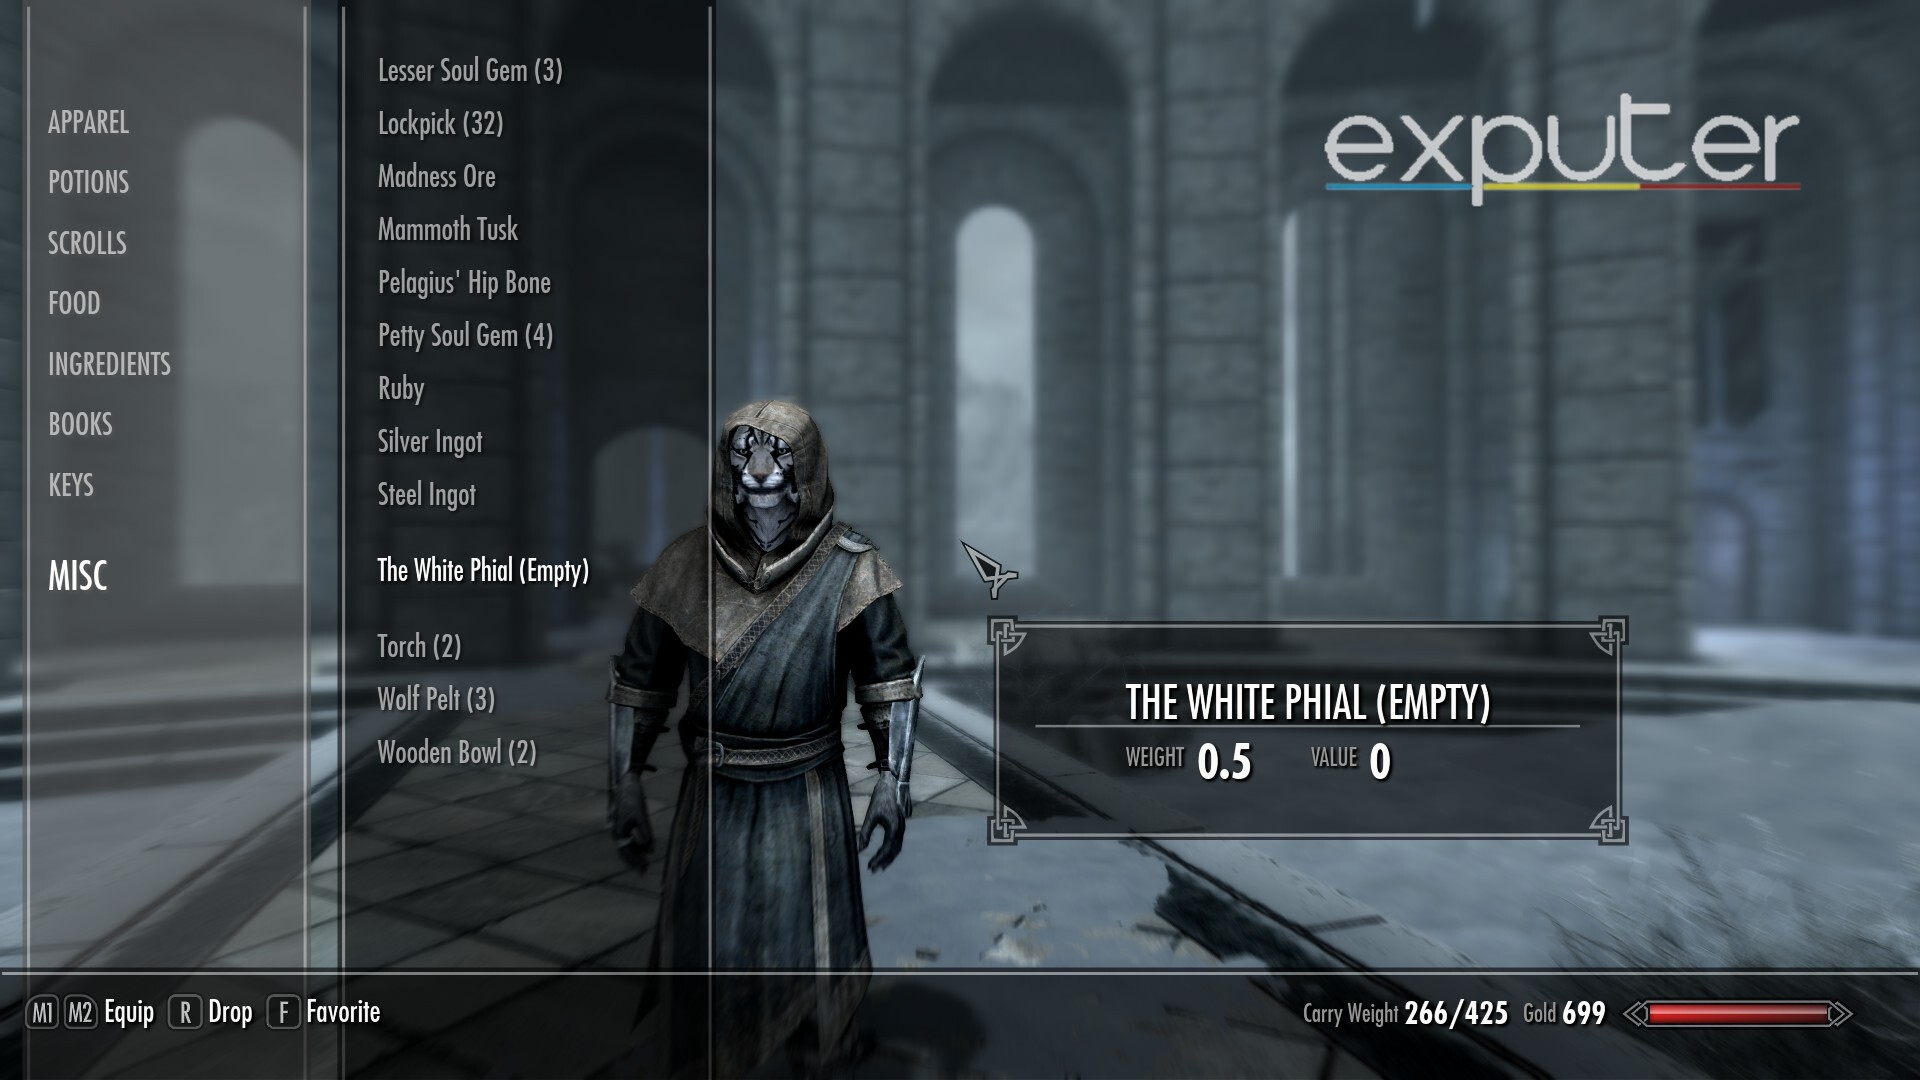 The White Phial mage gear in skyrim.